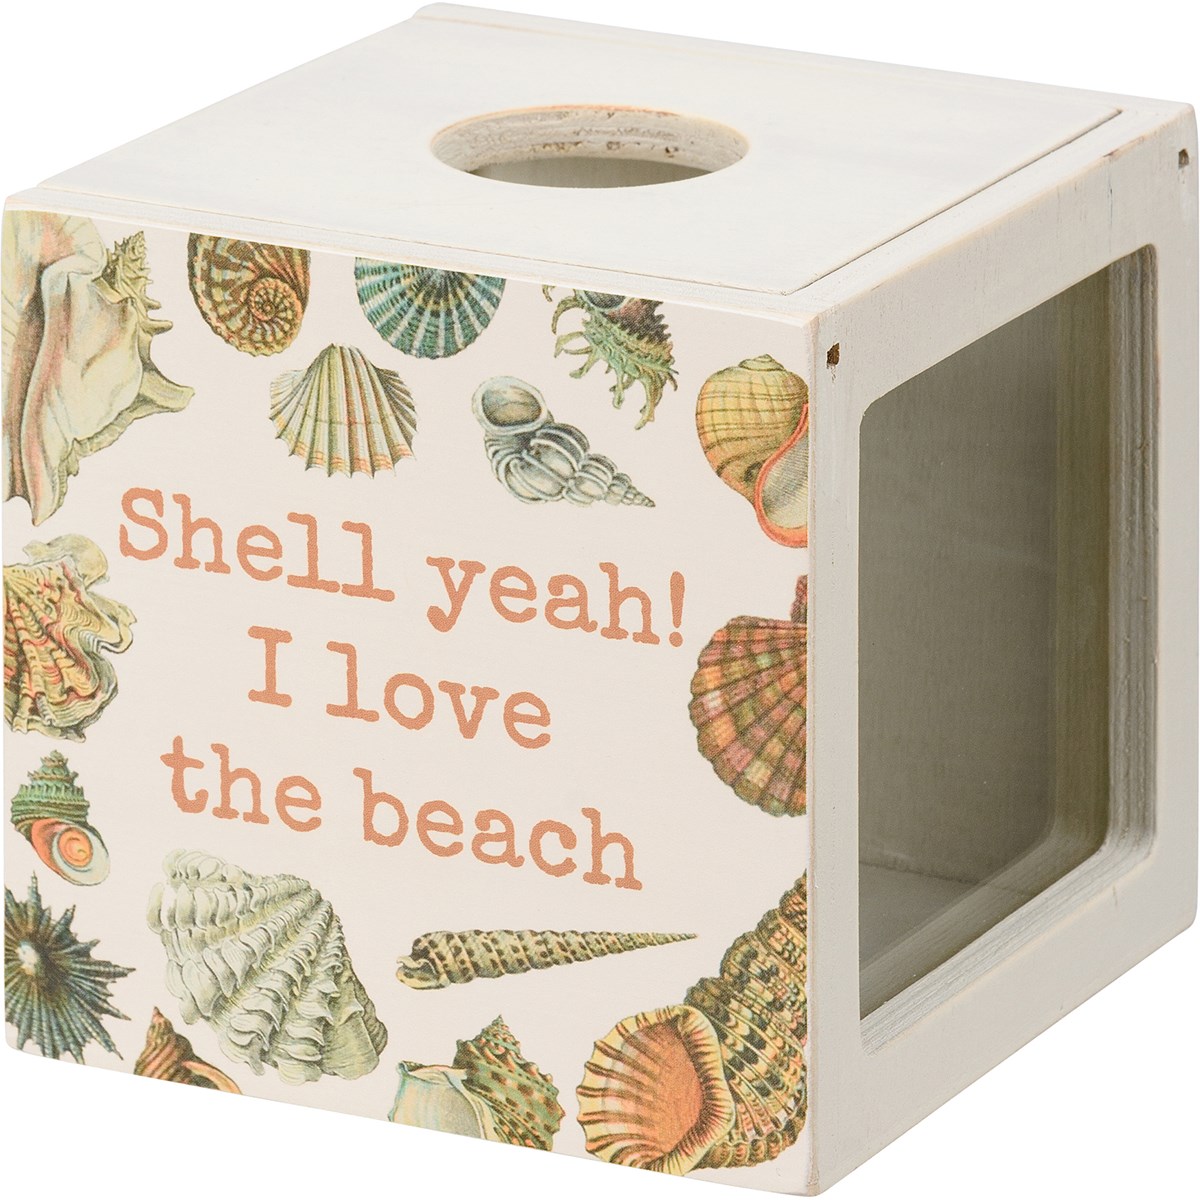 Shell Holder - Shell Yeah! I Love The Beach - 4.25" x 4.25" x 4.25" - Wood, Paper, Glass